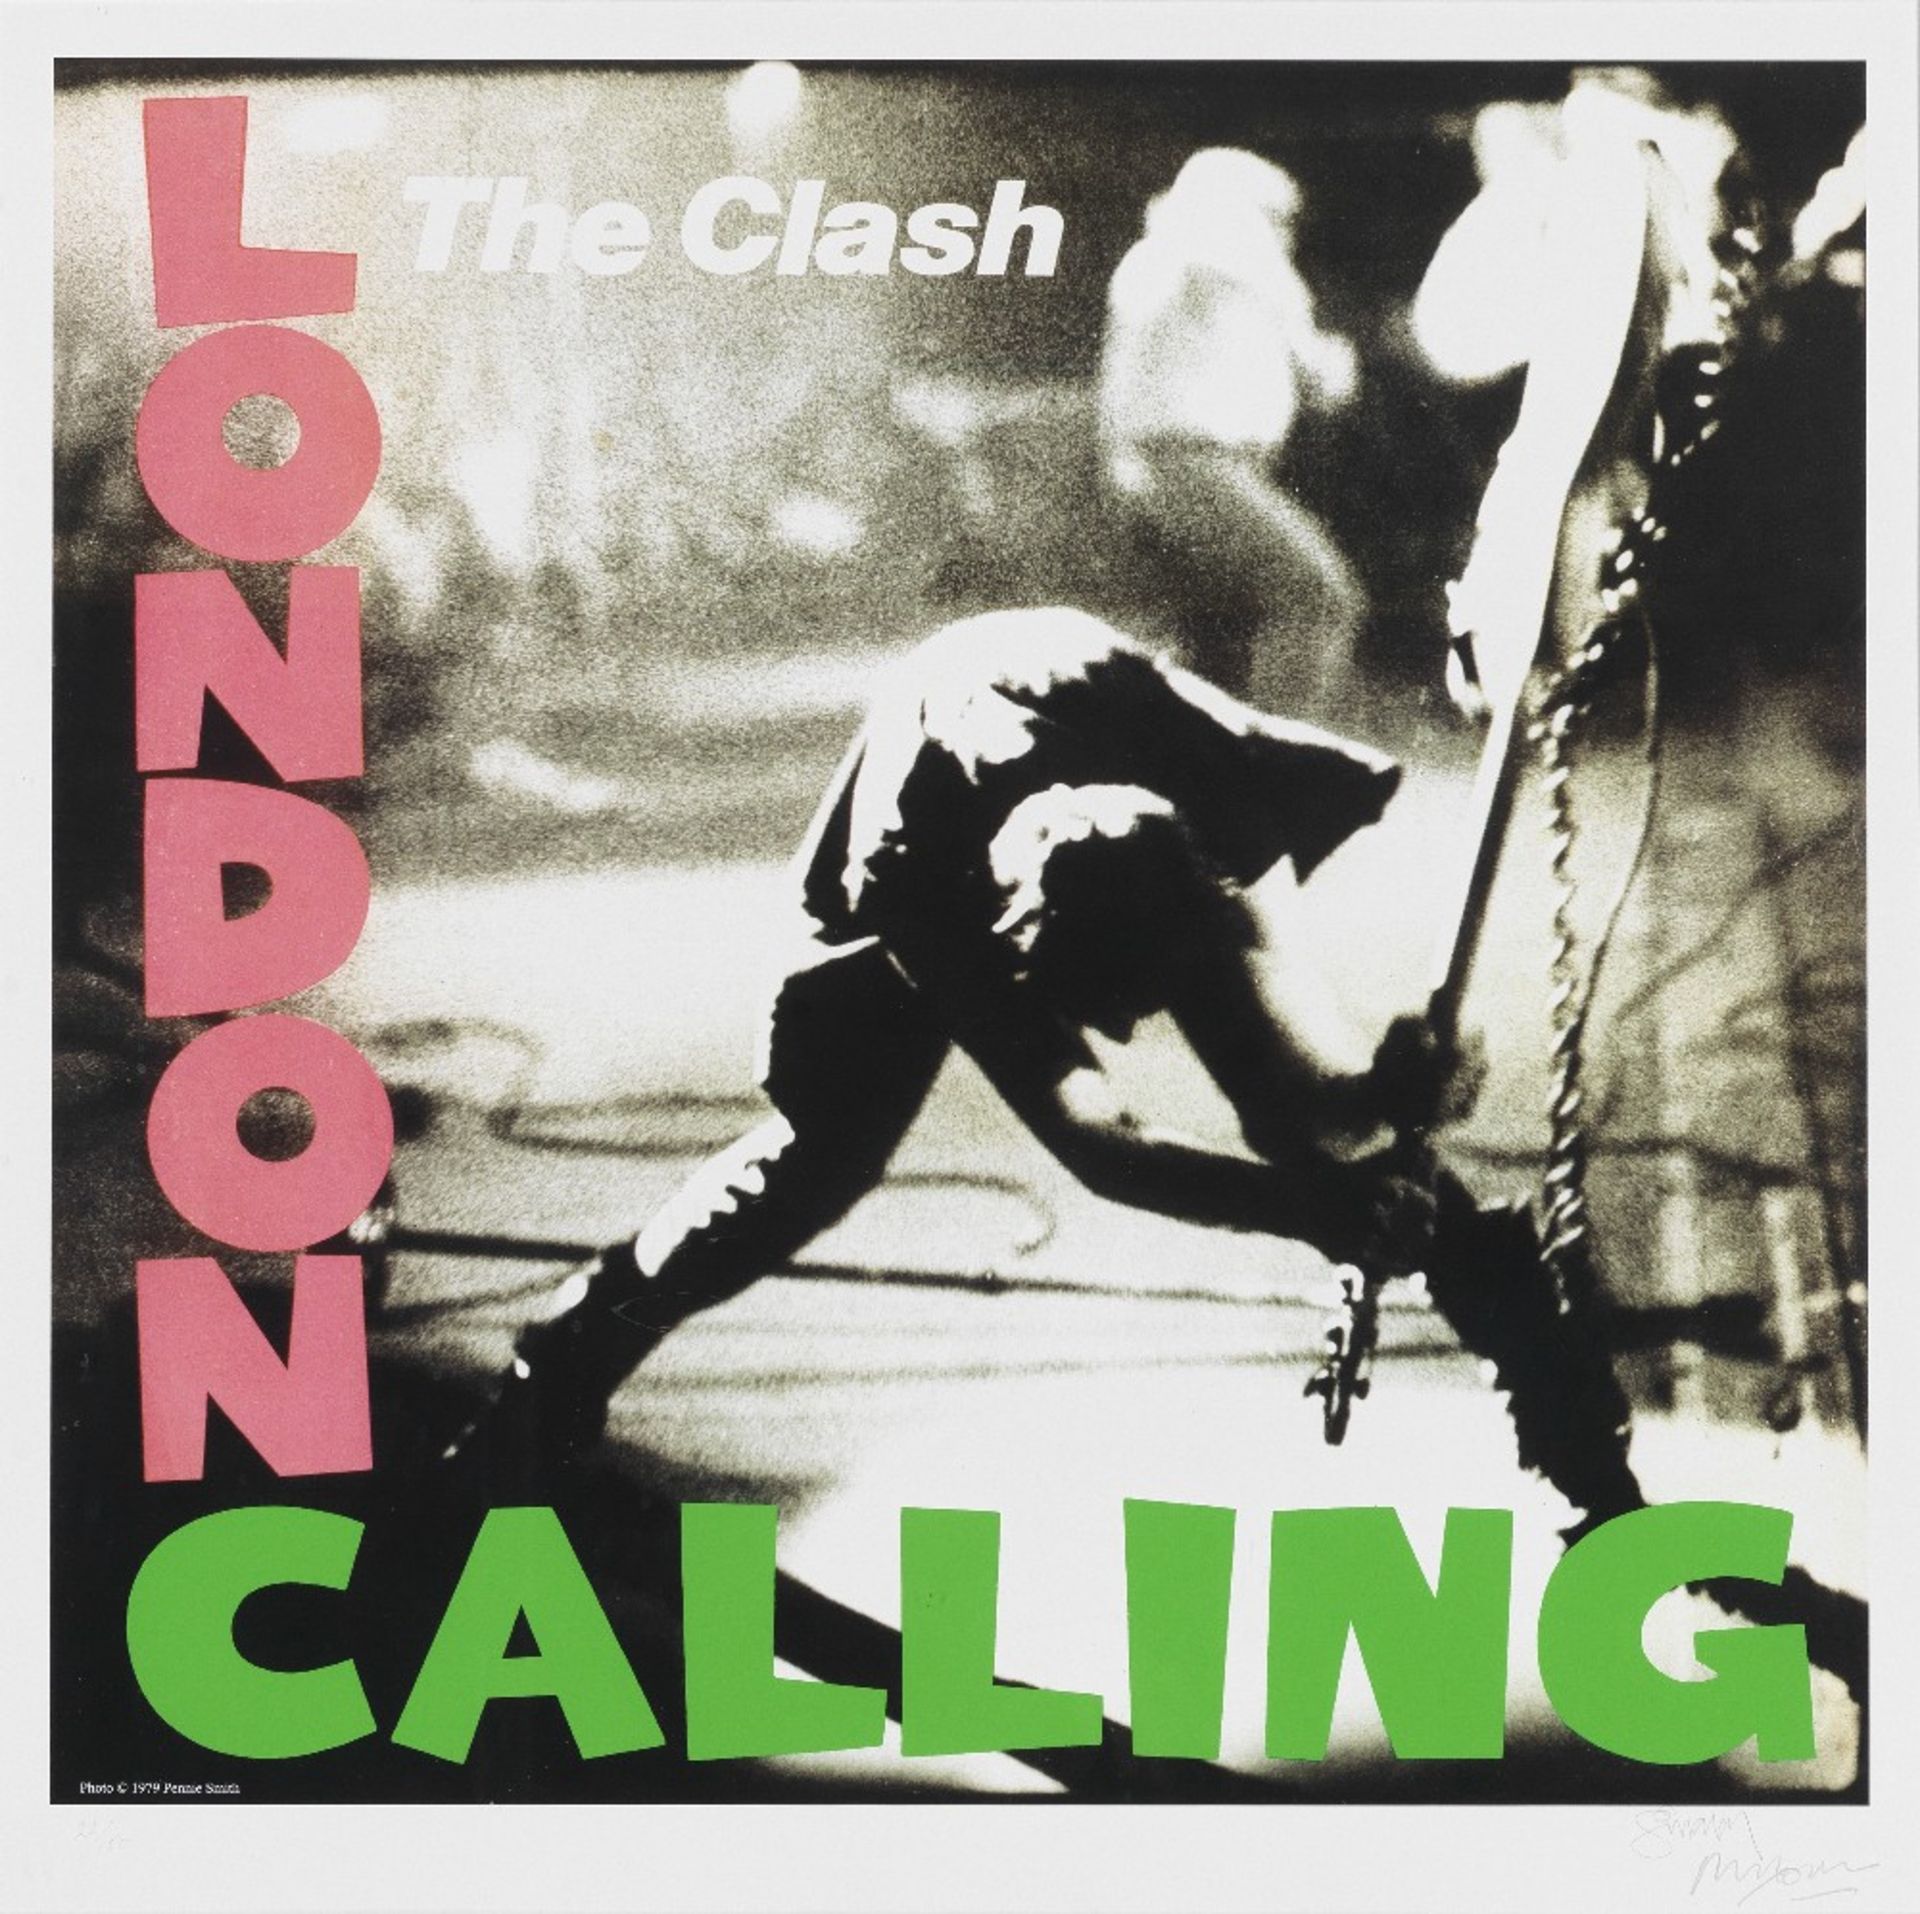 The Clash London Calling, printed later